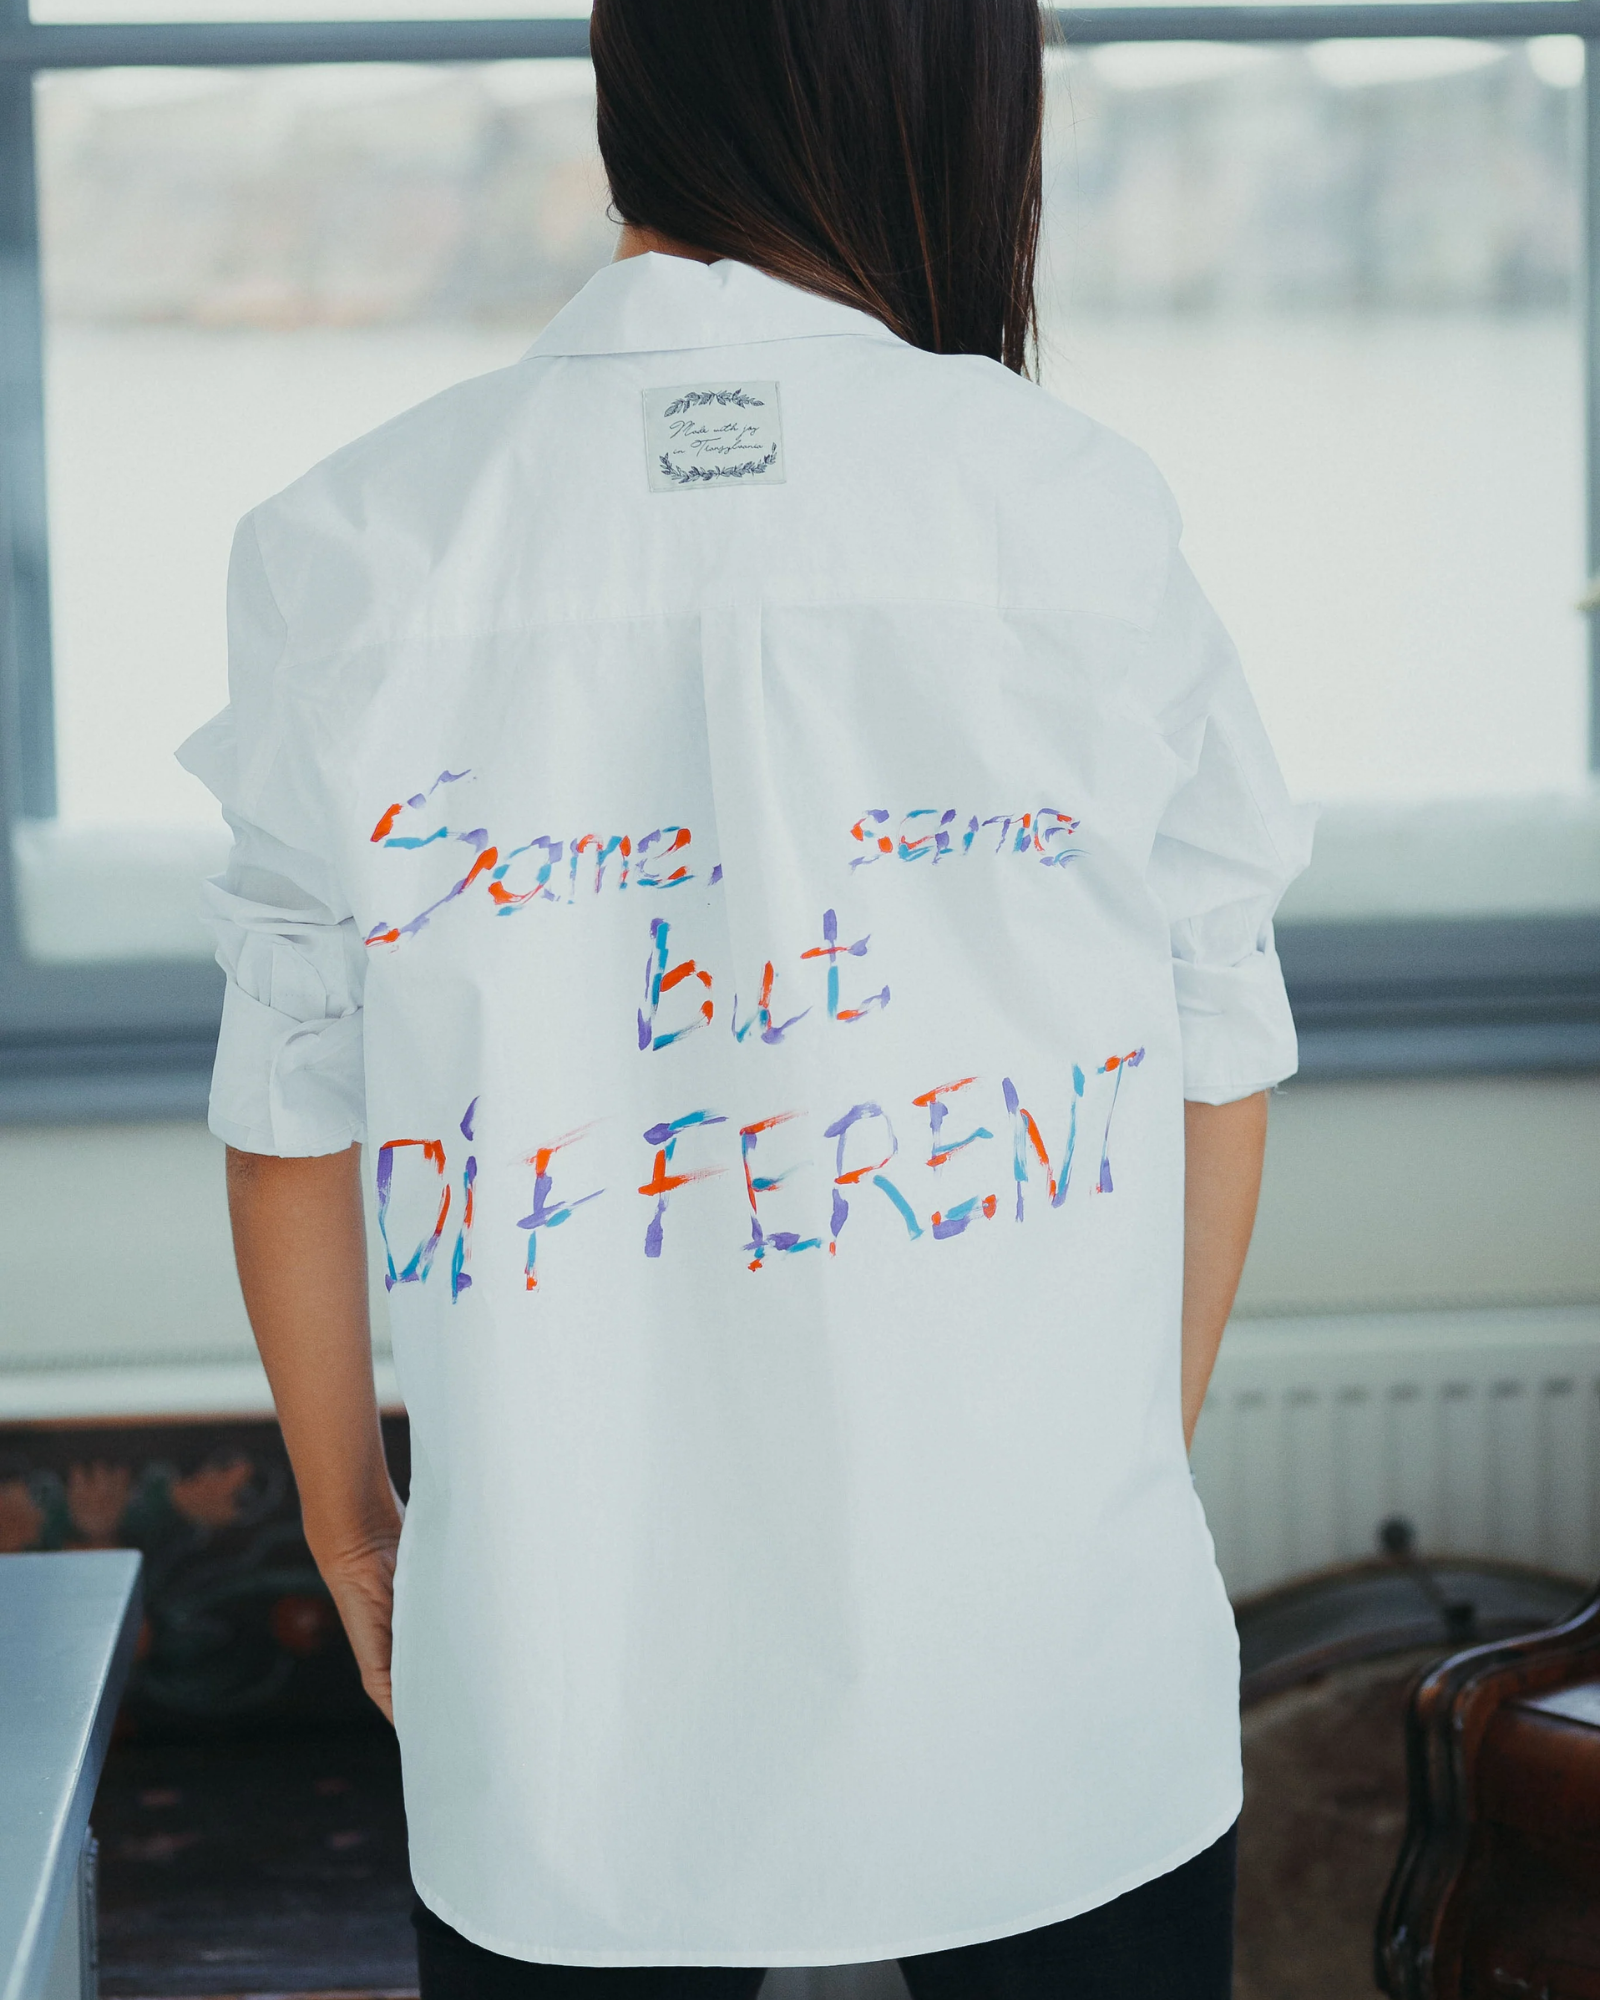 Hand painted women's shirt "Same same but different"